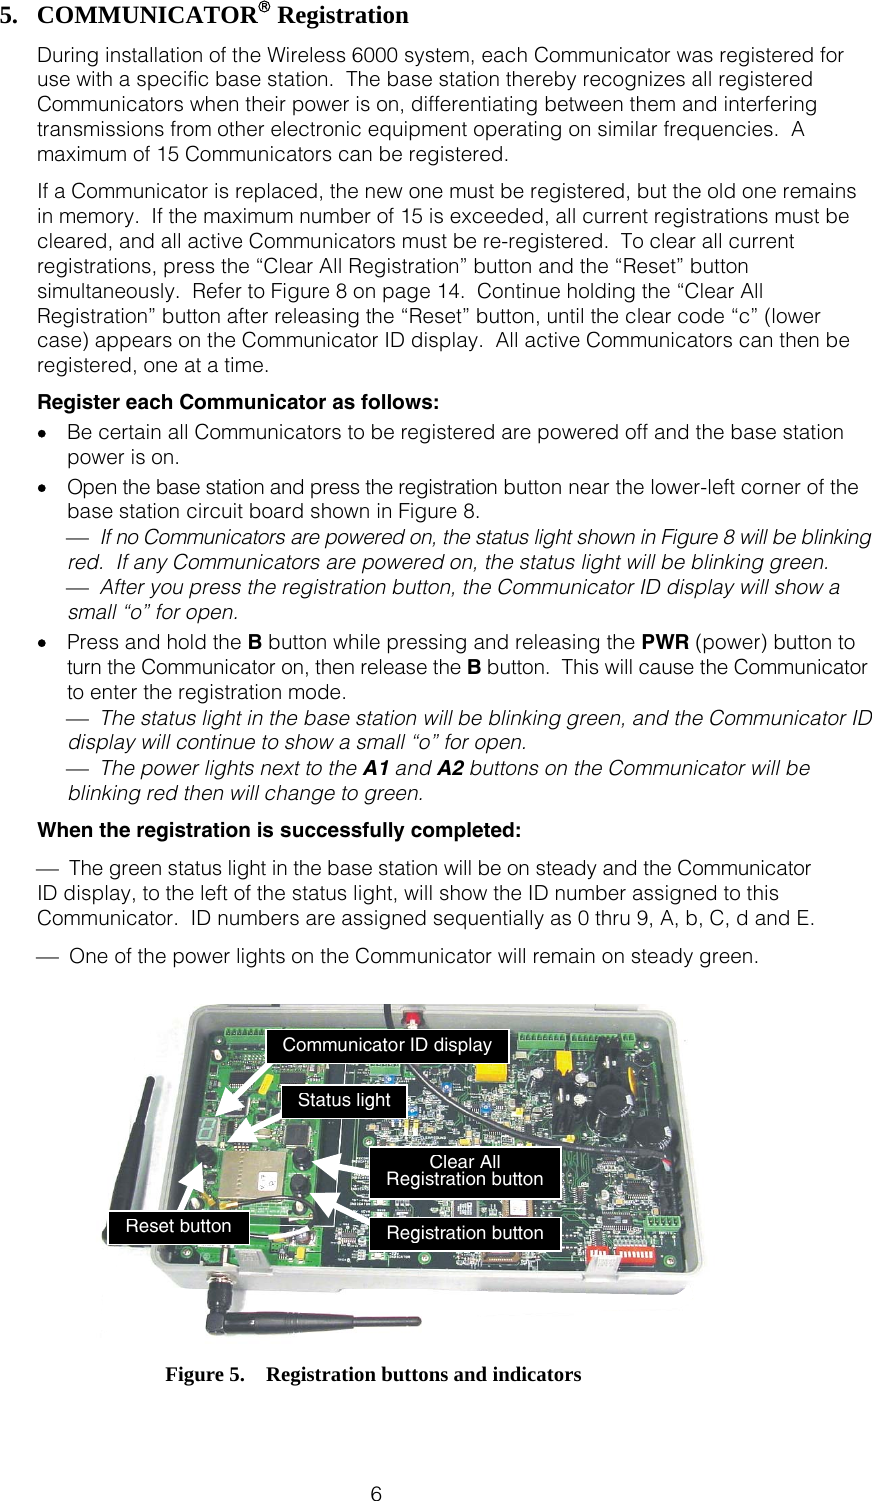  6 5. COMMUNICATOR® Registration During installation of the Wireless 6000 system, each Communicator was registered for use with a specific base station.  The base station thereby recognizes all registered Communicators when their power is on, differentiating between them and interfering transmissions from other electronic equipment operating on similar frequencies.  A maximum of 15 Communicators can be registered.   If a Communicator is replaced, the new one must be registered, but the old one remains in memory.  If the maximum number of 15 is exceeded, all current registrations must be cleared, and all active Communicators must be re-registered.  To clear all current registrations, press the “Clear All Registration” button and the “Reset” button simultaneously.  Refer to Figure 8 on page 14.  Continue holding the “Clear All Registration” button after releasing the “Reset” button, until the clear code “c” (lower case) appears on the Communicator ID display.  All active Communicators can then be registered, one at a time. Register each Communicator as follows: •  Be certain all Communicators to be registered are powered off and the base station power is on. •  Open the base station and press the registration button near the lower-left corner of the base station circuit board shown in Figure 8. ⎯  If no Communicators are powered on, the status light shown in Figure 8 will be blinking red.  If any Communicators are powered on, the status light will be blinking green. ⎯  After you press the registration button, the Communicator ID display will show a small “o” for open. •  Press and hold the B button while pressing and releasing the PWR (power) button to turn the Communicator on, then release the B button.  This will cause the Communicator to enter the registration mode.  ⎯  The status light in the base station will be blinking green, and the Communicator ID display will continue to show a small “o” for open.  ⎯  The power lights next to the A1 and A2 buttons on the Communicator will be blinking red then will change to green. When the registration is successfully completed: ⎯  The green status light in the base station will be on steady and the Communicator  ID display, to the left of the status light, will show the ID number assigned to this Communicator.  ID numbers are assigned sequentially as 0 thru 9, A, b, C, d and E. ⎯  One of the power lights on the Communicator will remain on steady green.     Figure 5.    Registration buttons and indicators Registration button Status light Communicator ID display Clear All Registration button Reset button 